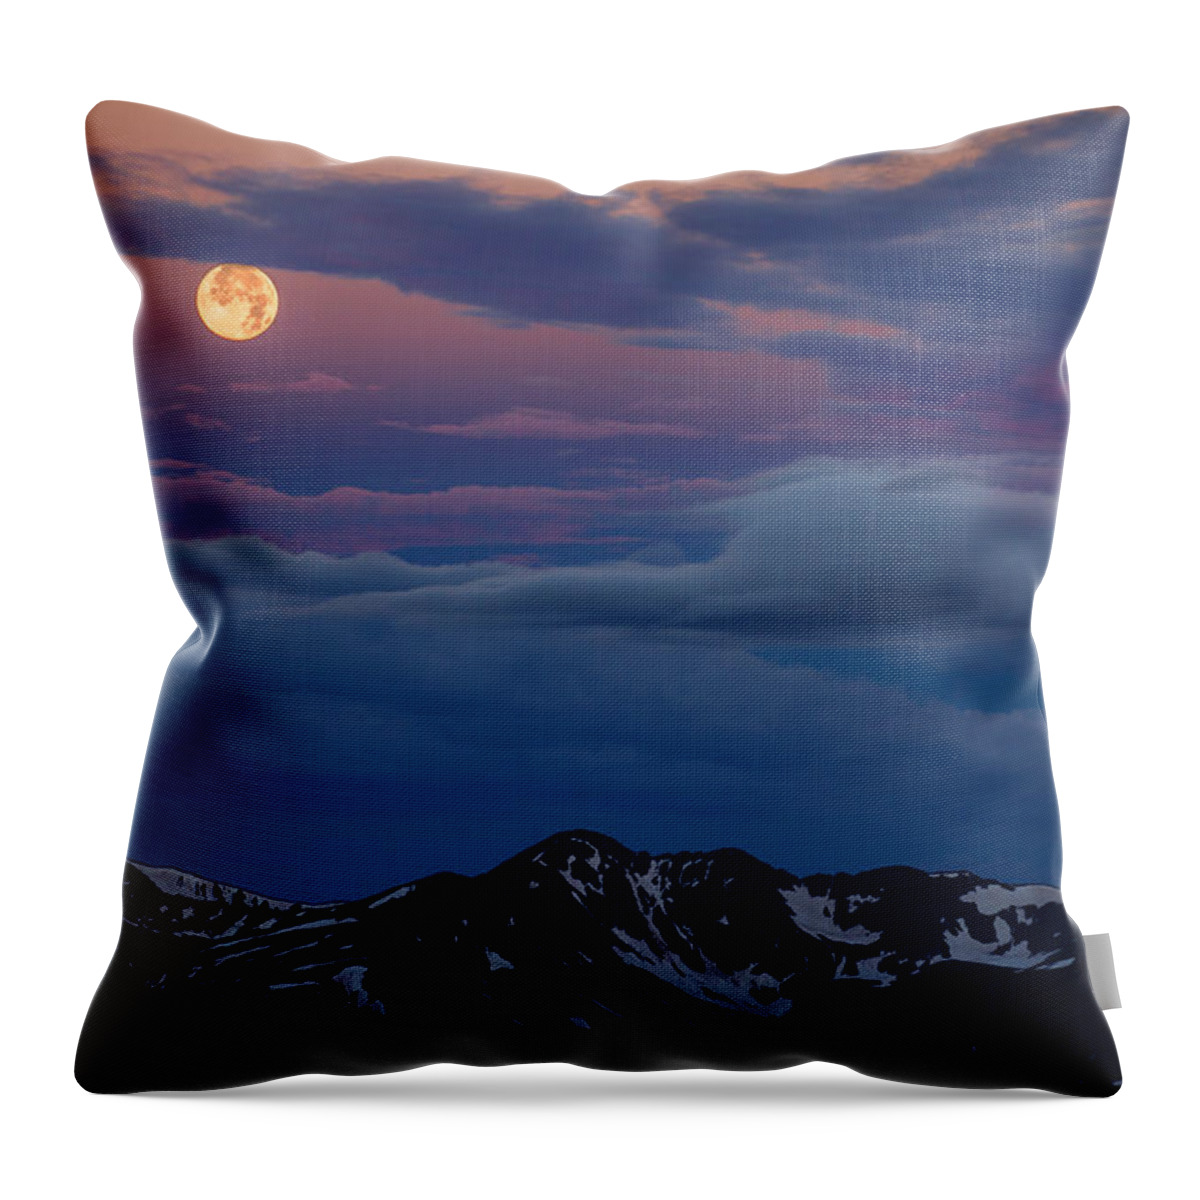  Sunrise Throw Pillow featuring the photograph Moon Over Rockies by Darren White